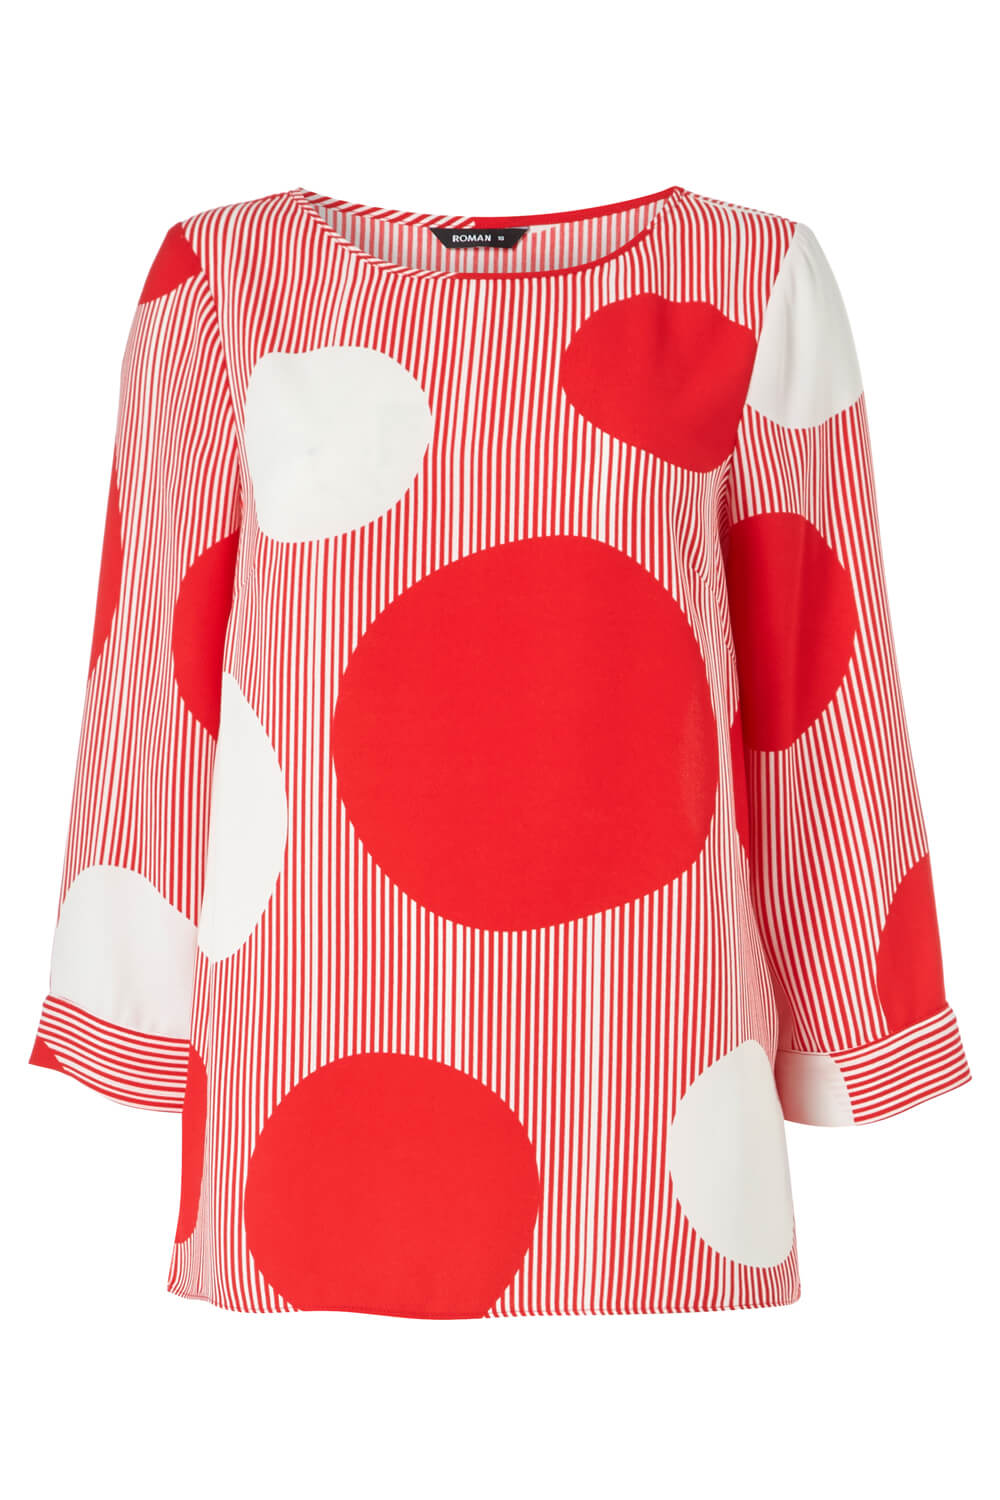 Red Spot Print 3/4 Sleeve Top, Image 4 of 8